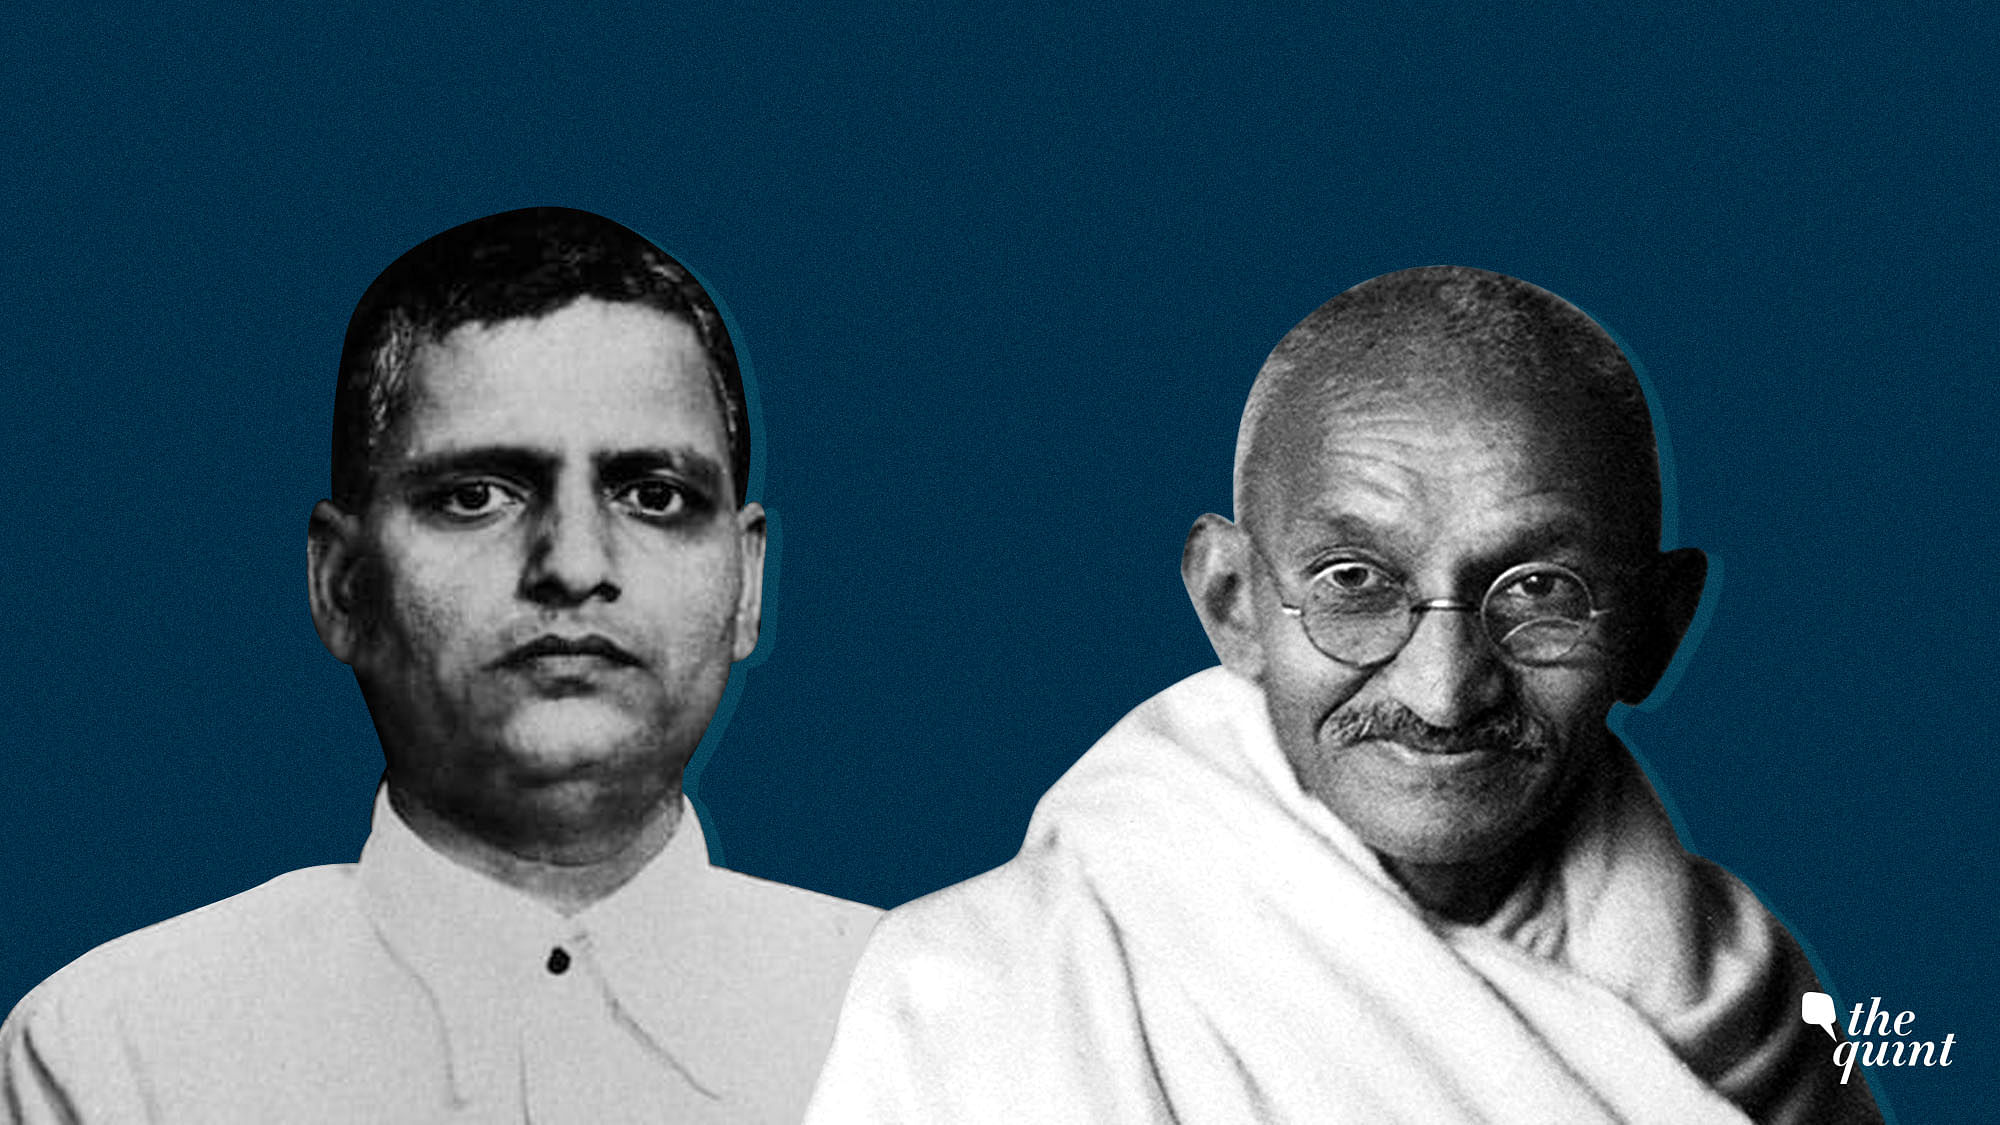 Image of Gandhi (R) and Godse (his assassin), used for representational purposes.